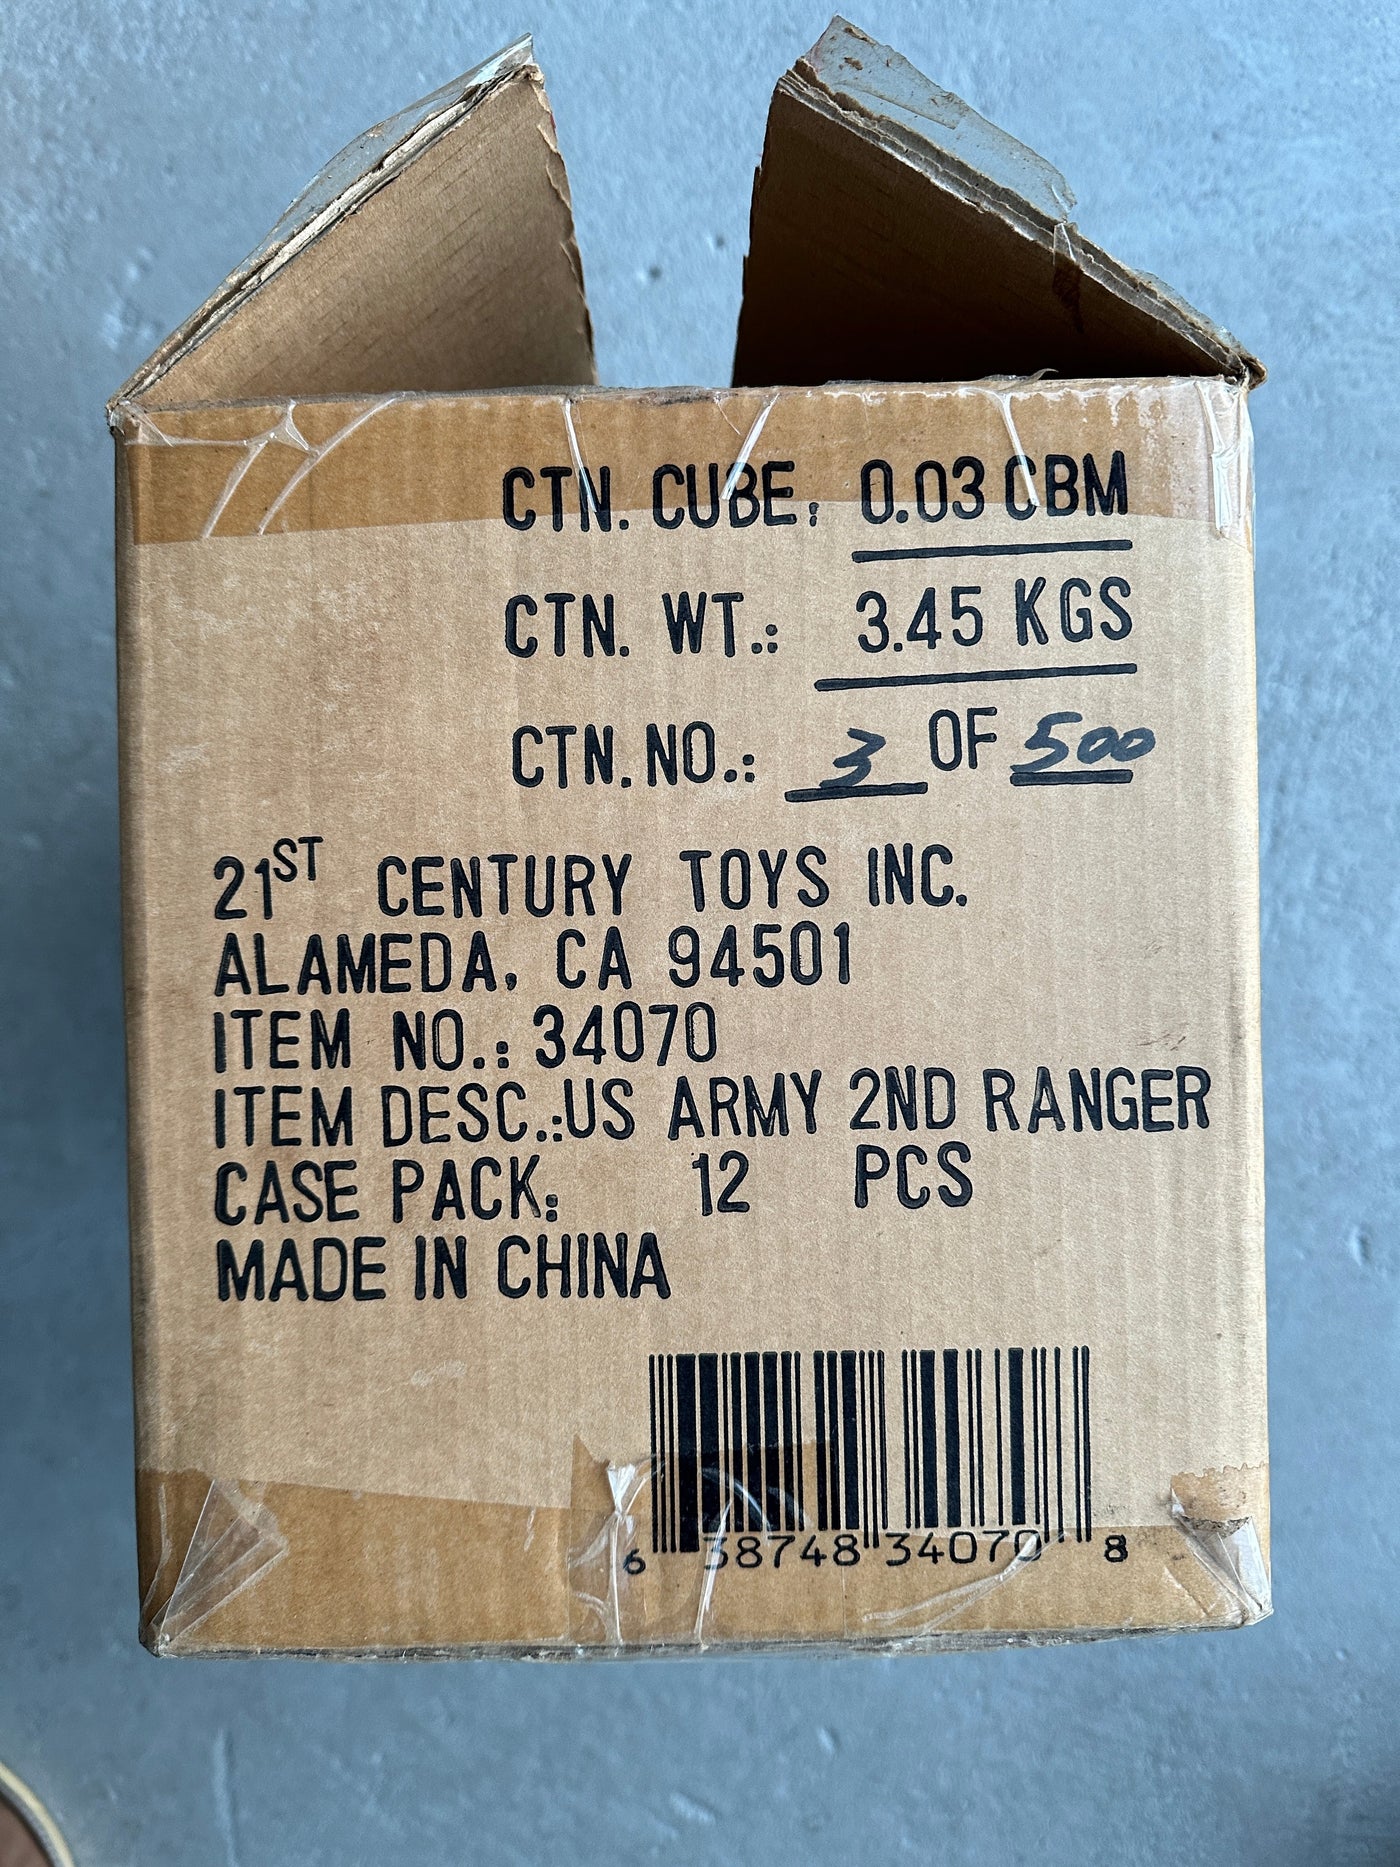 1/6th scale Uniform and Equipment set: WWII 2nd Ranger Battalion, (2003 production)